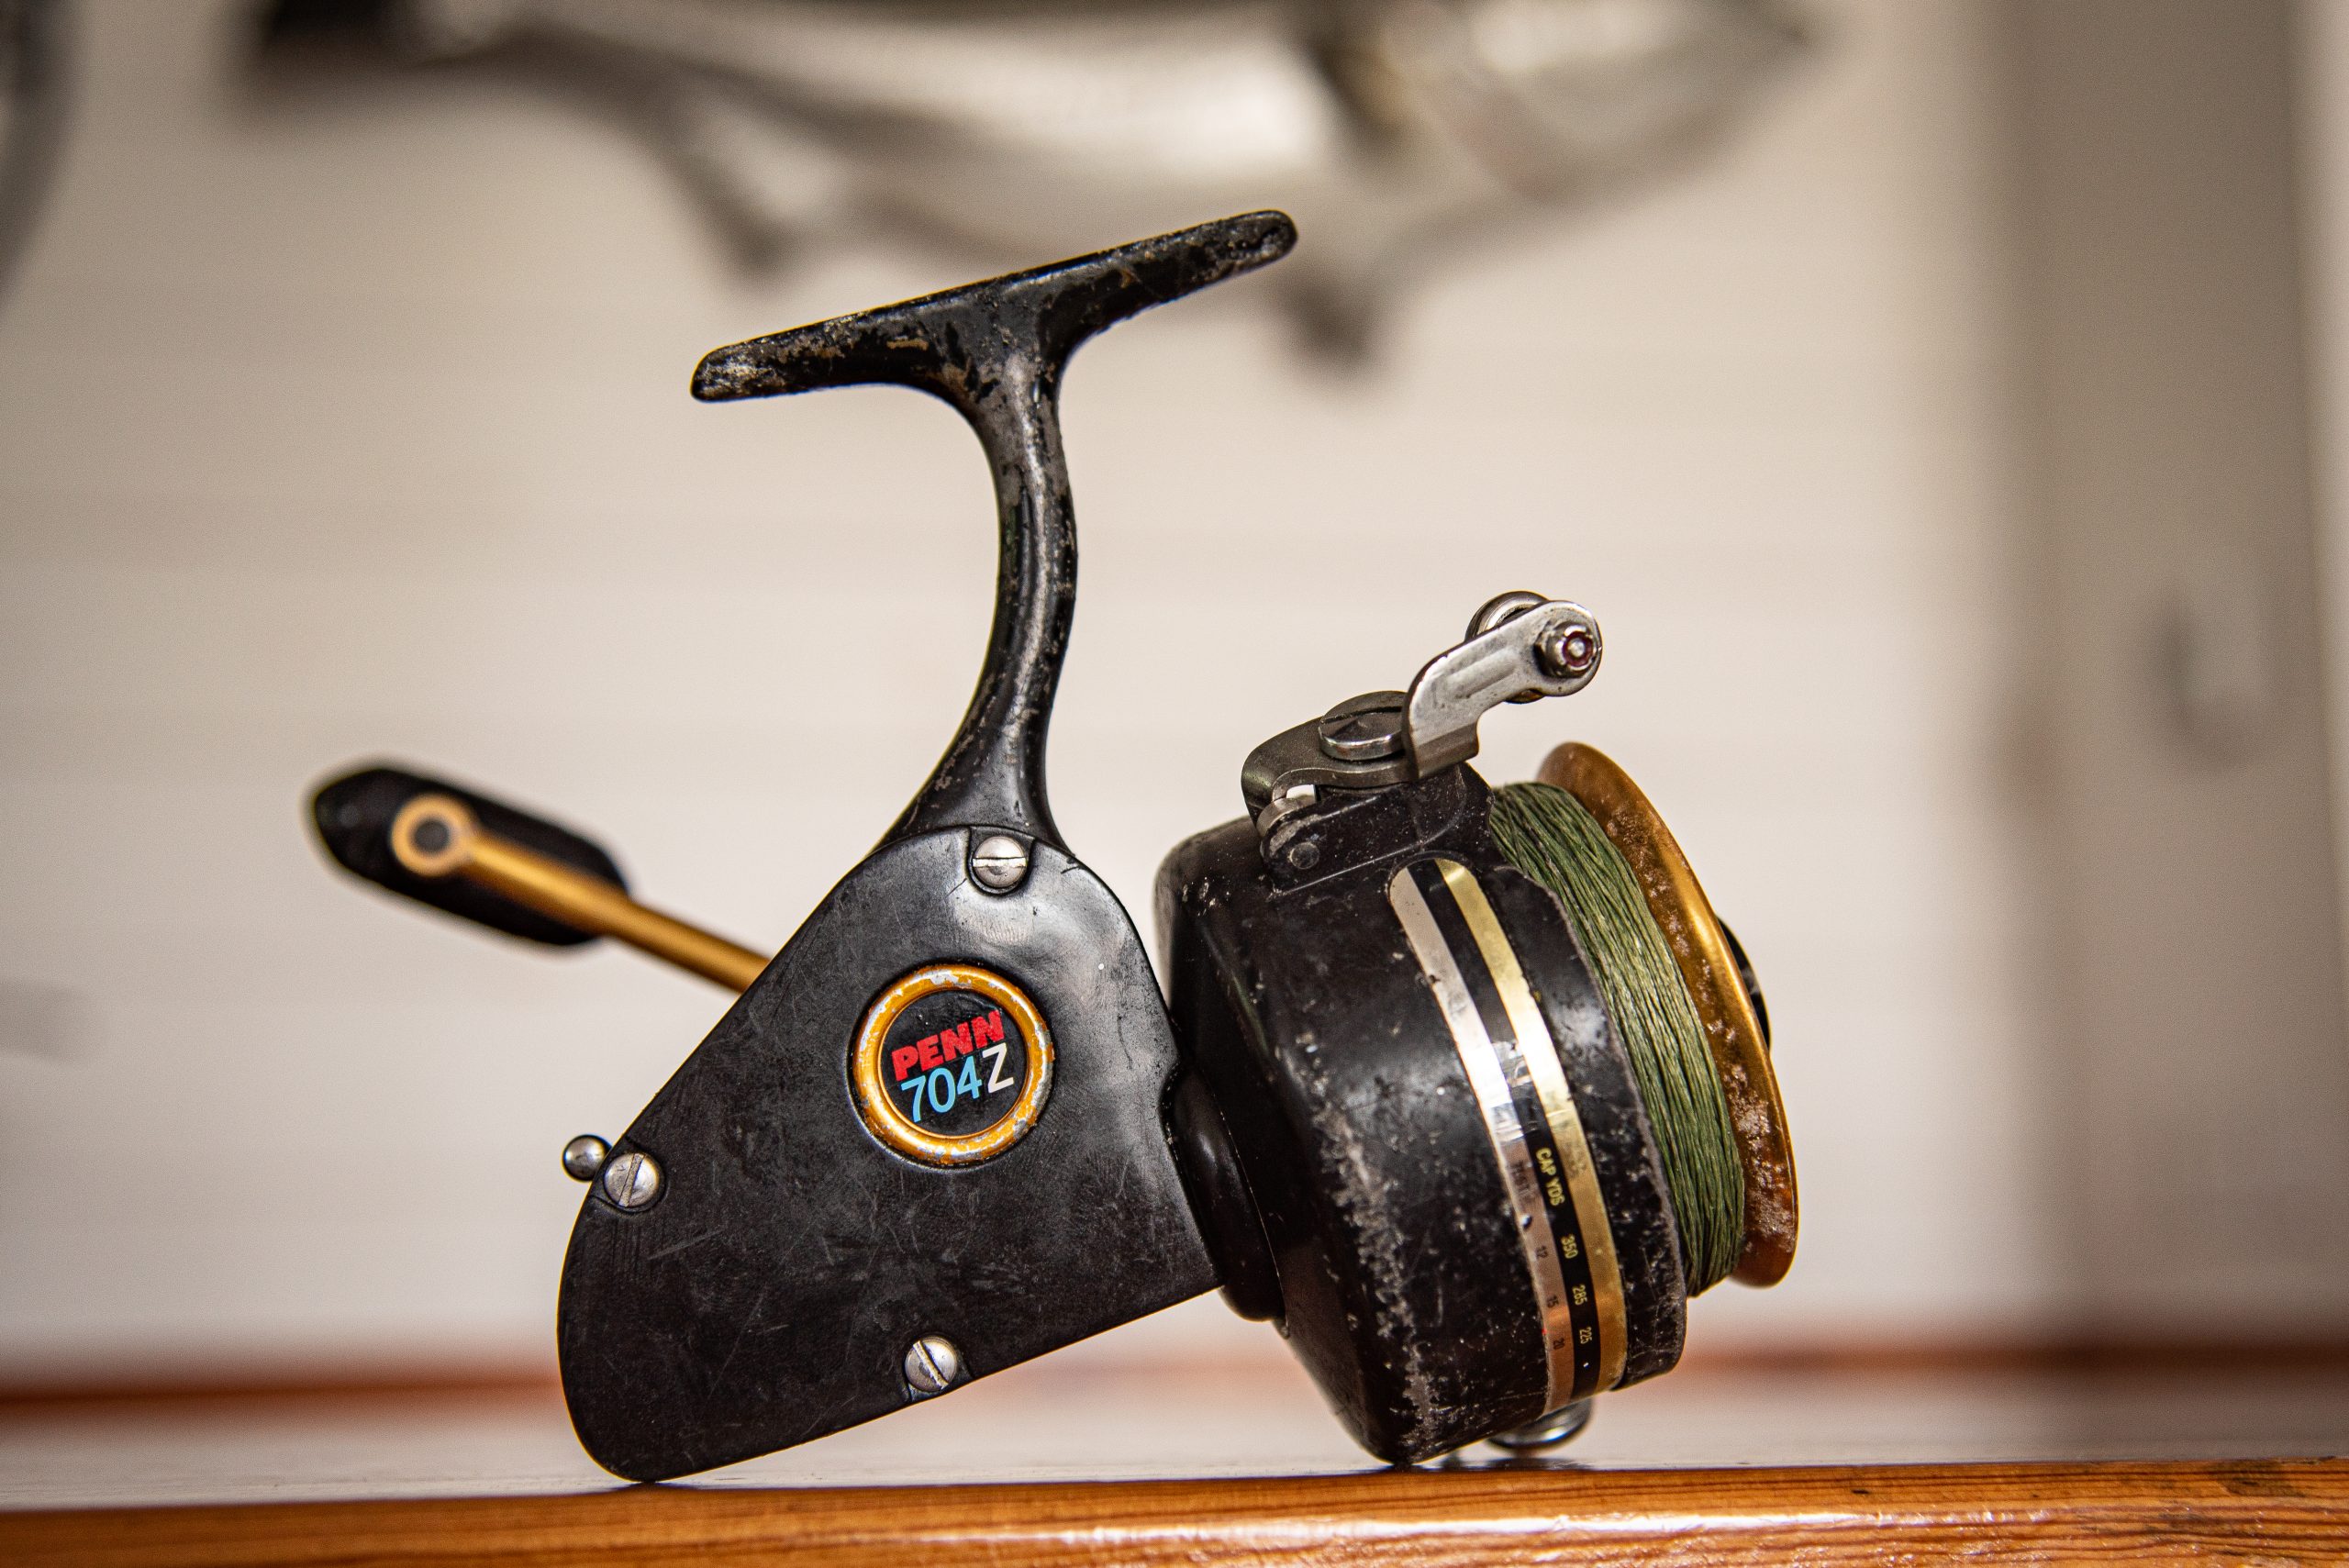 Surfcasting Icon: The 704z - On The Water